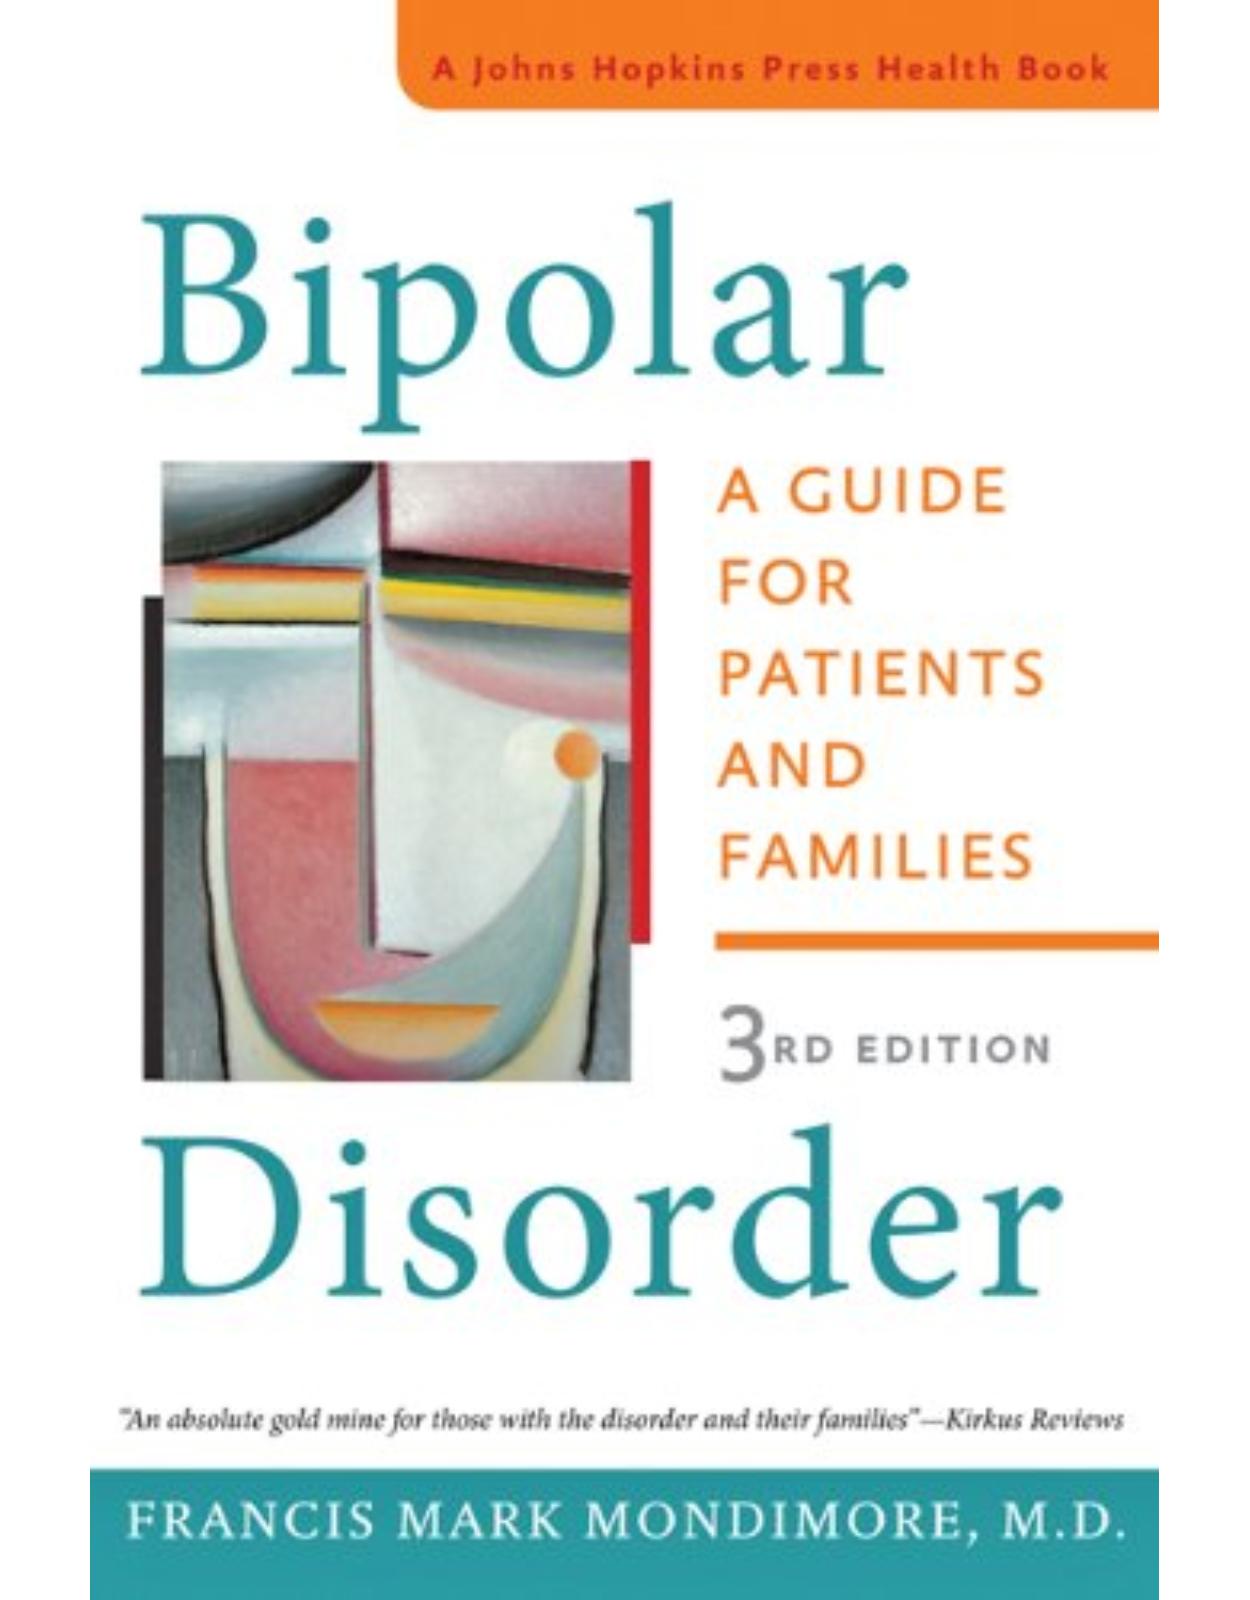 Bipolar Disorder, A Guide for Patients and Families (Third Edition)